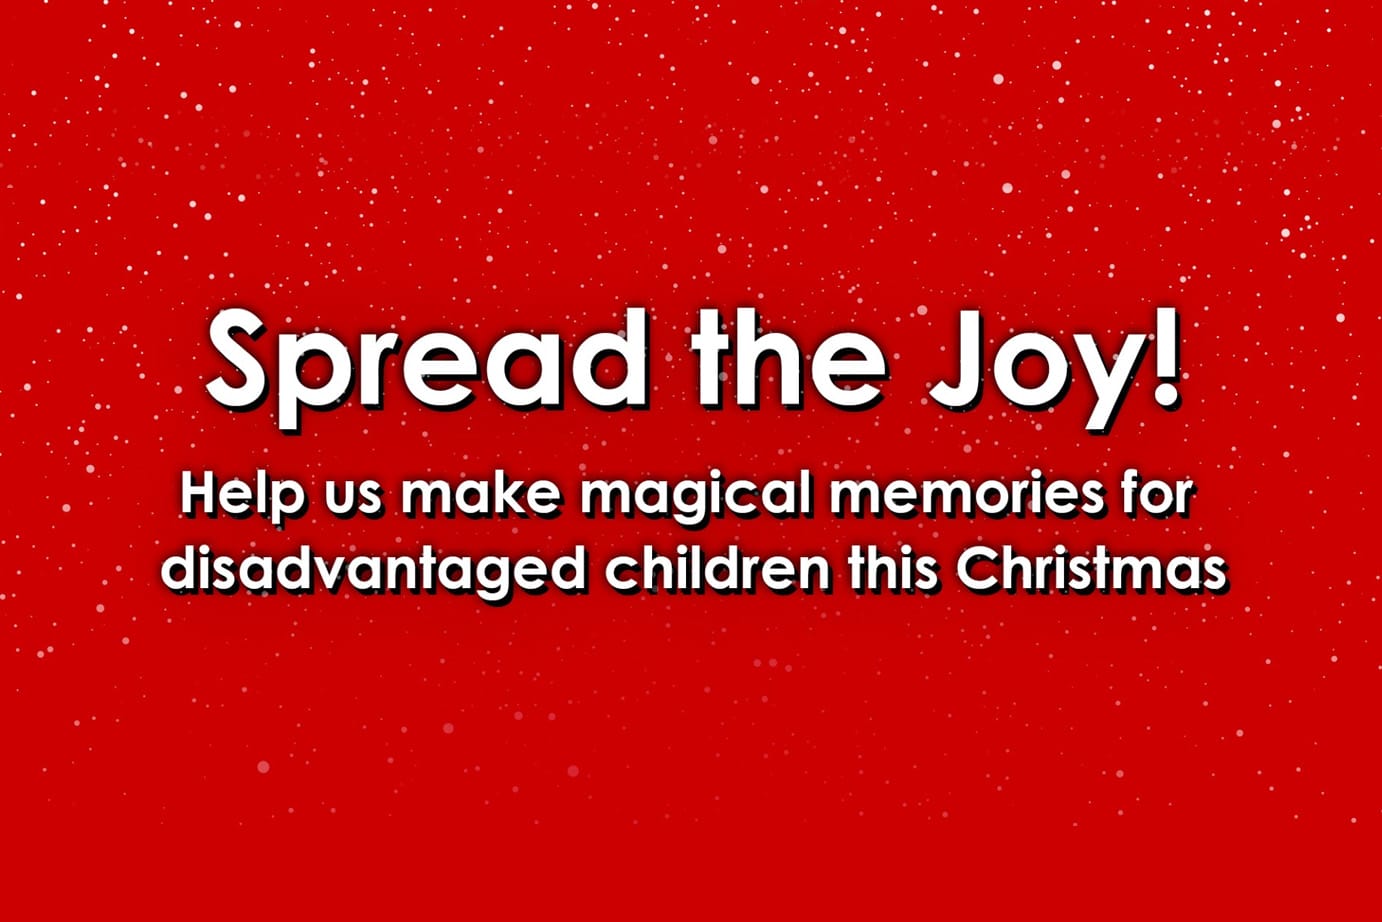 Red background with snowfall. White text reads Spread the Joy. Help us make magical memories for disadvantaged children this Christmas.